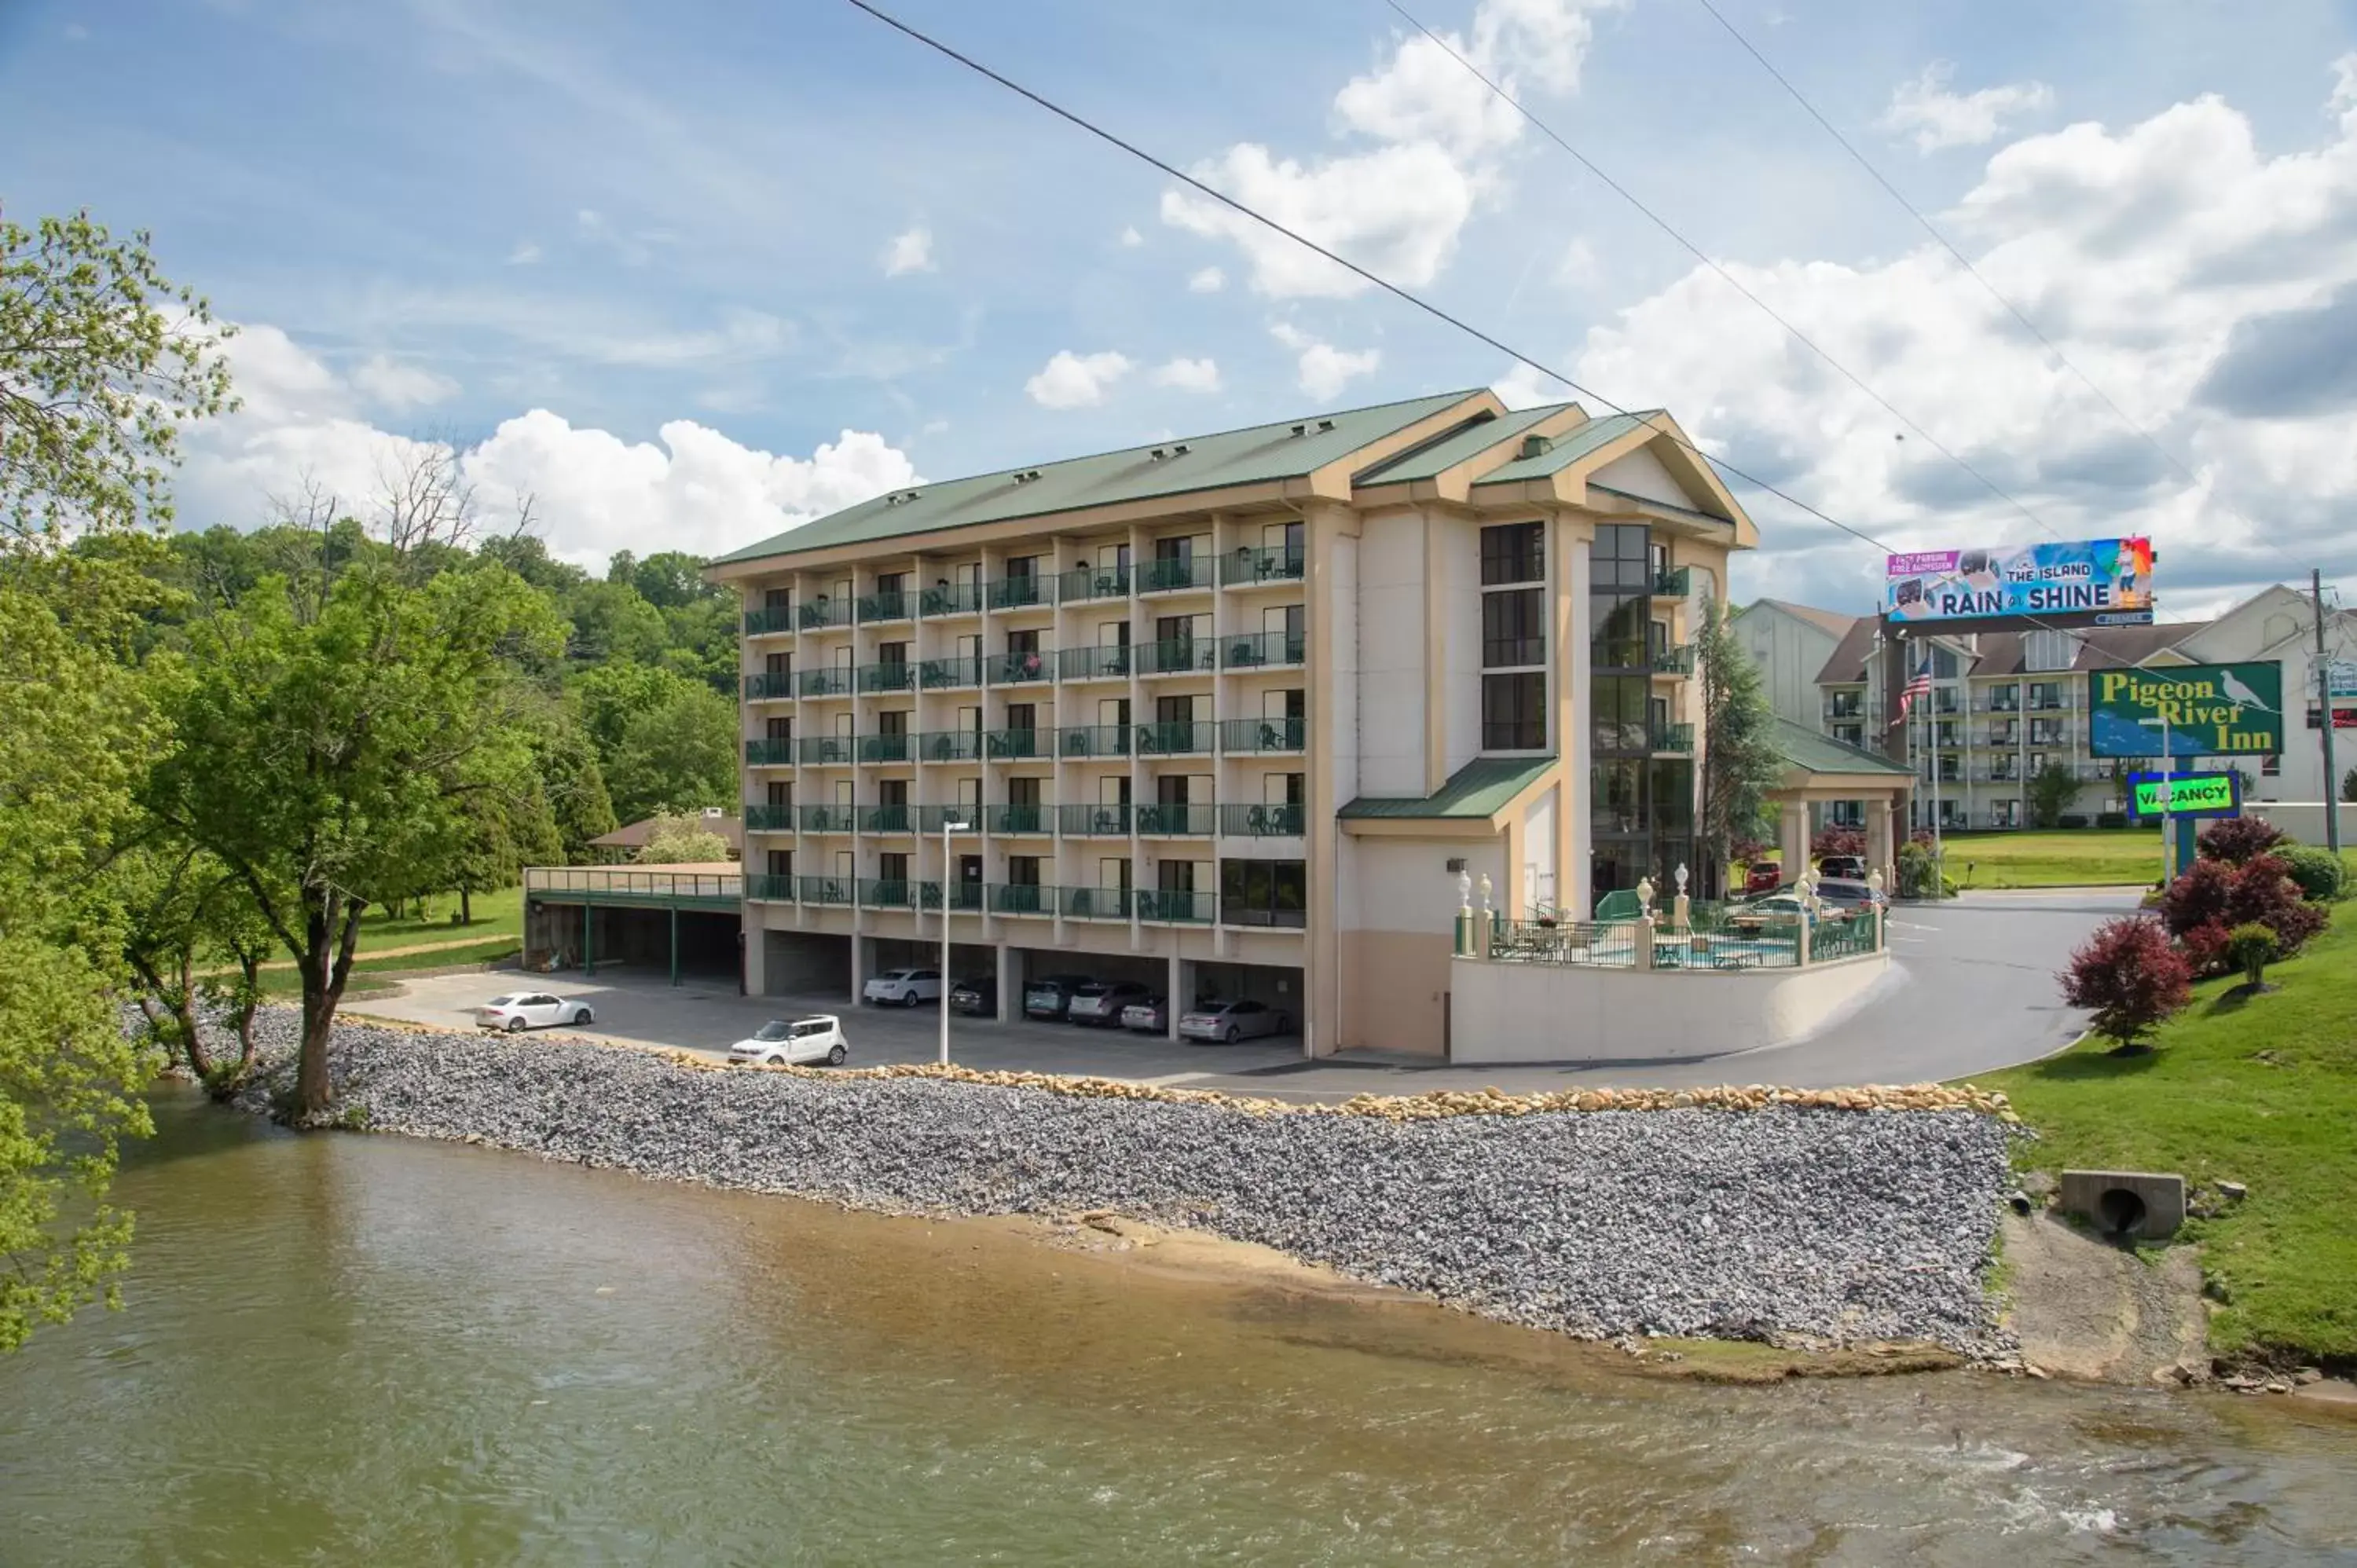 Property Building in Pigeon River Inn